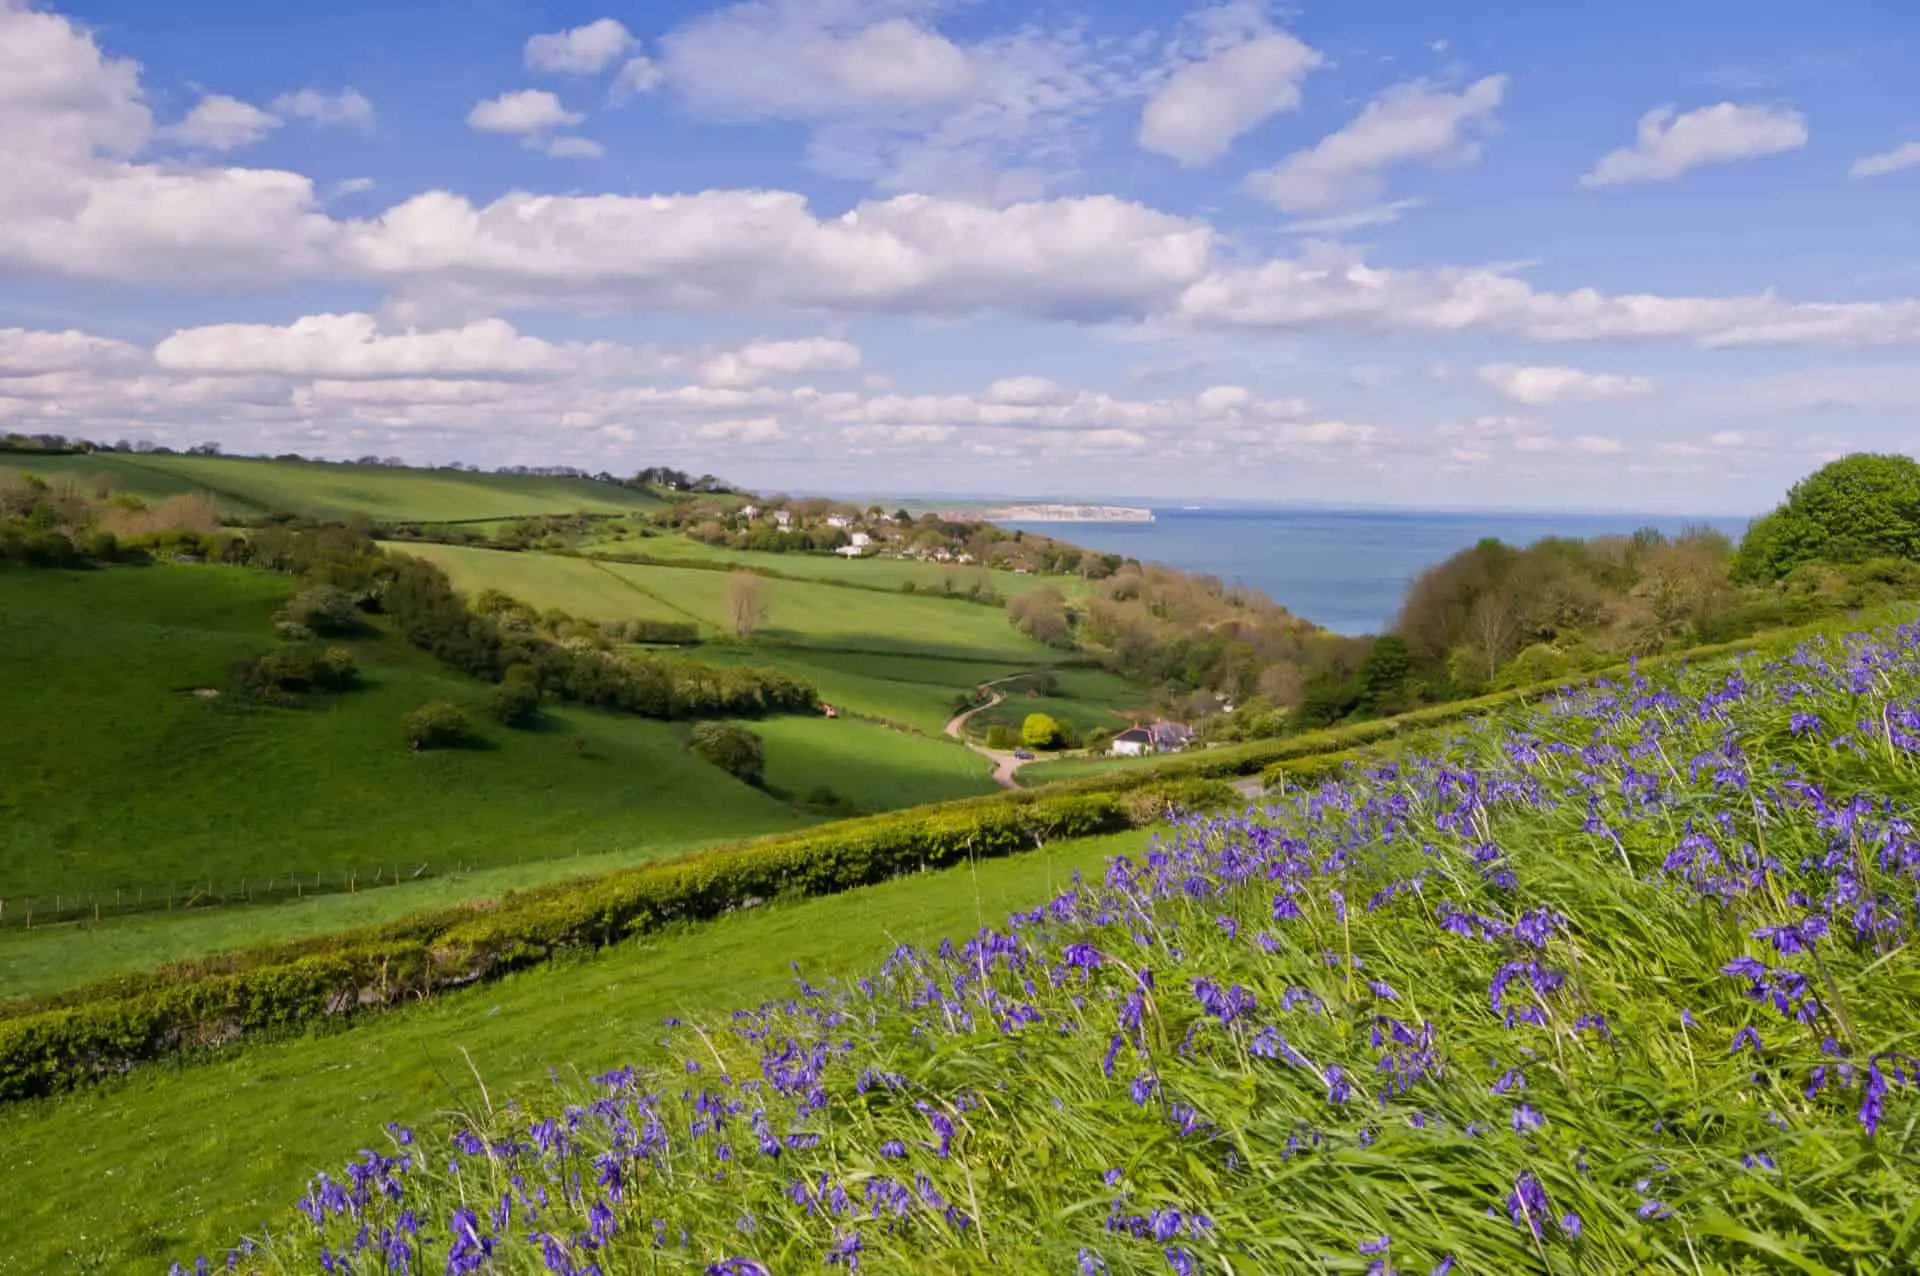 Image: © Visit Isle of Wight / View from Luccombe over Sandown Bay to Culver